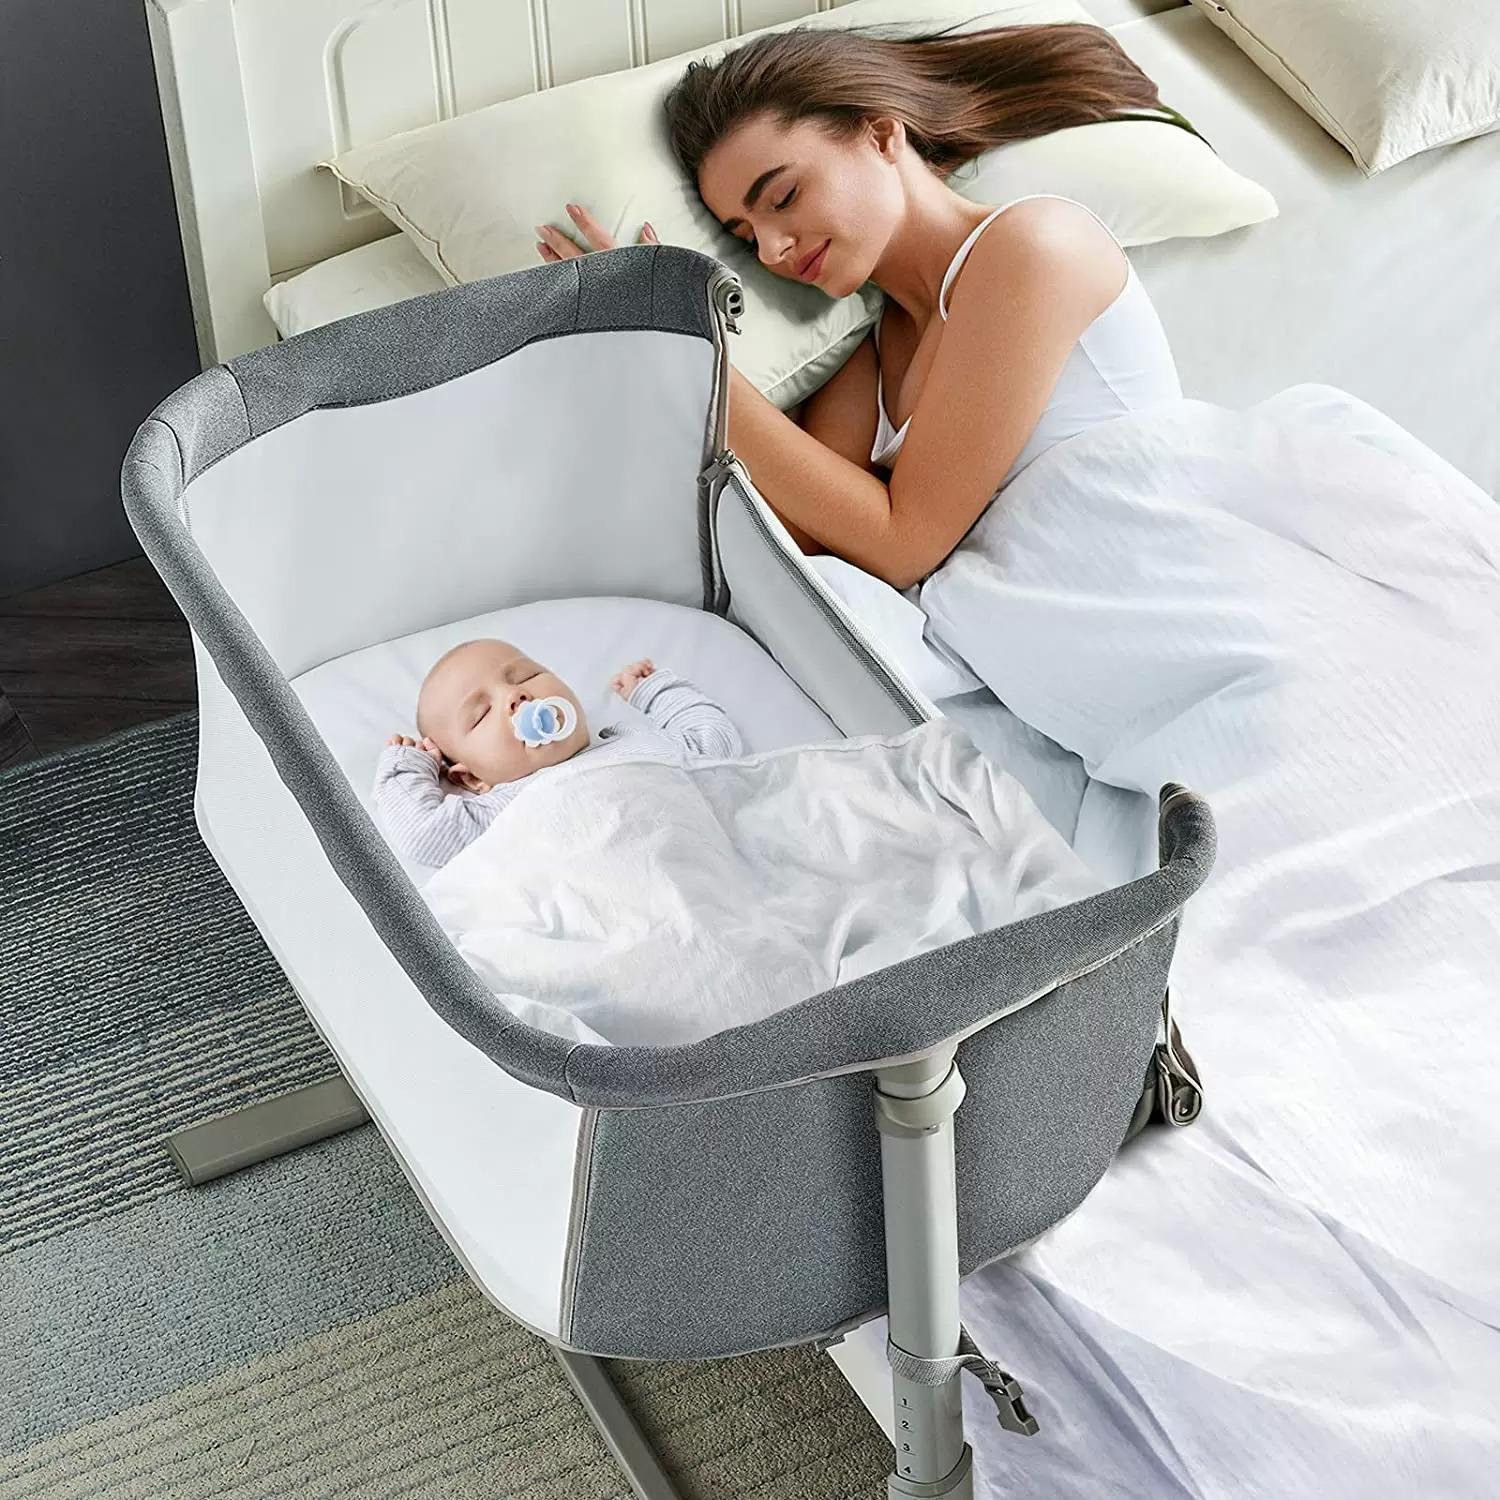 Ronbei Baby Bassinet Bedside Sleeper for $119.99 Shipped